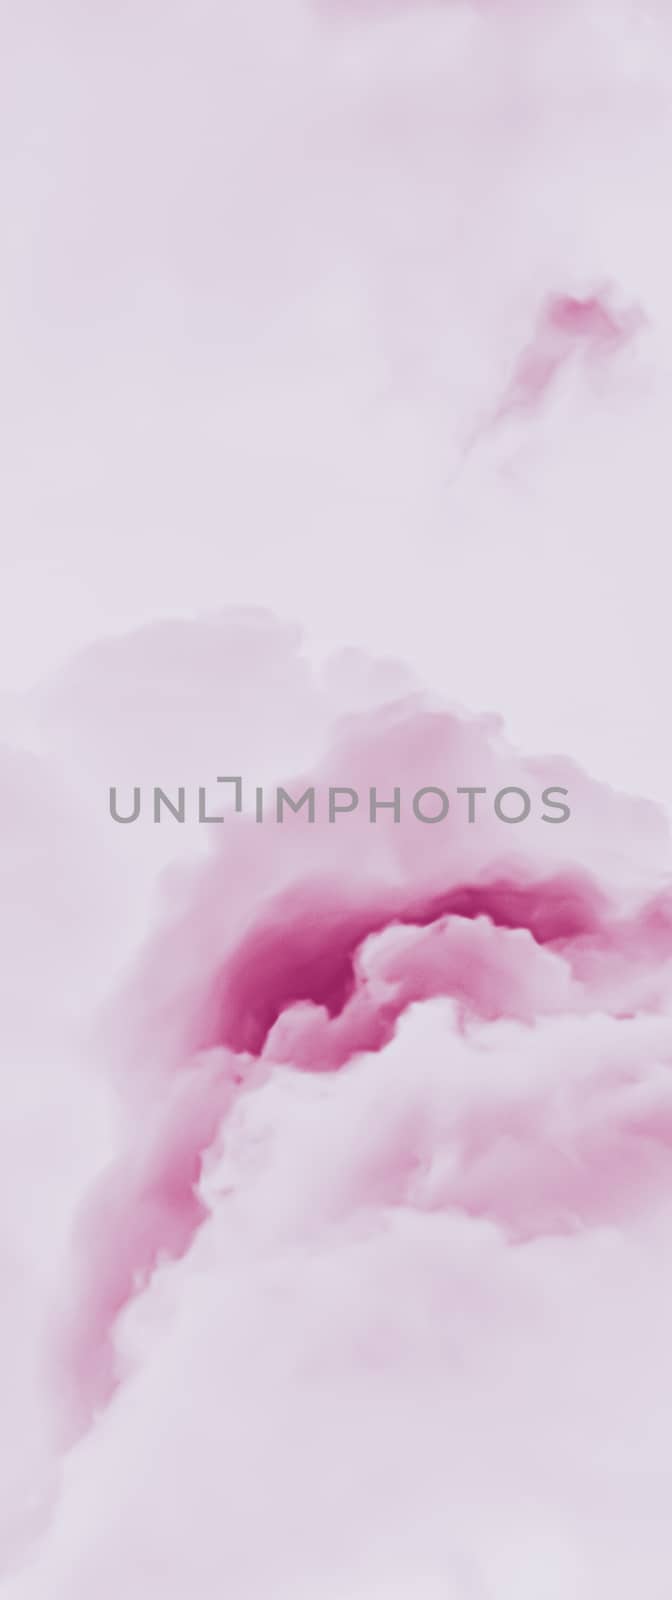 Minimalistic pink cloudy background as abstract backdrop, minimal design and artistic splashes